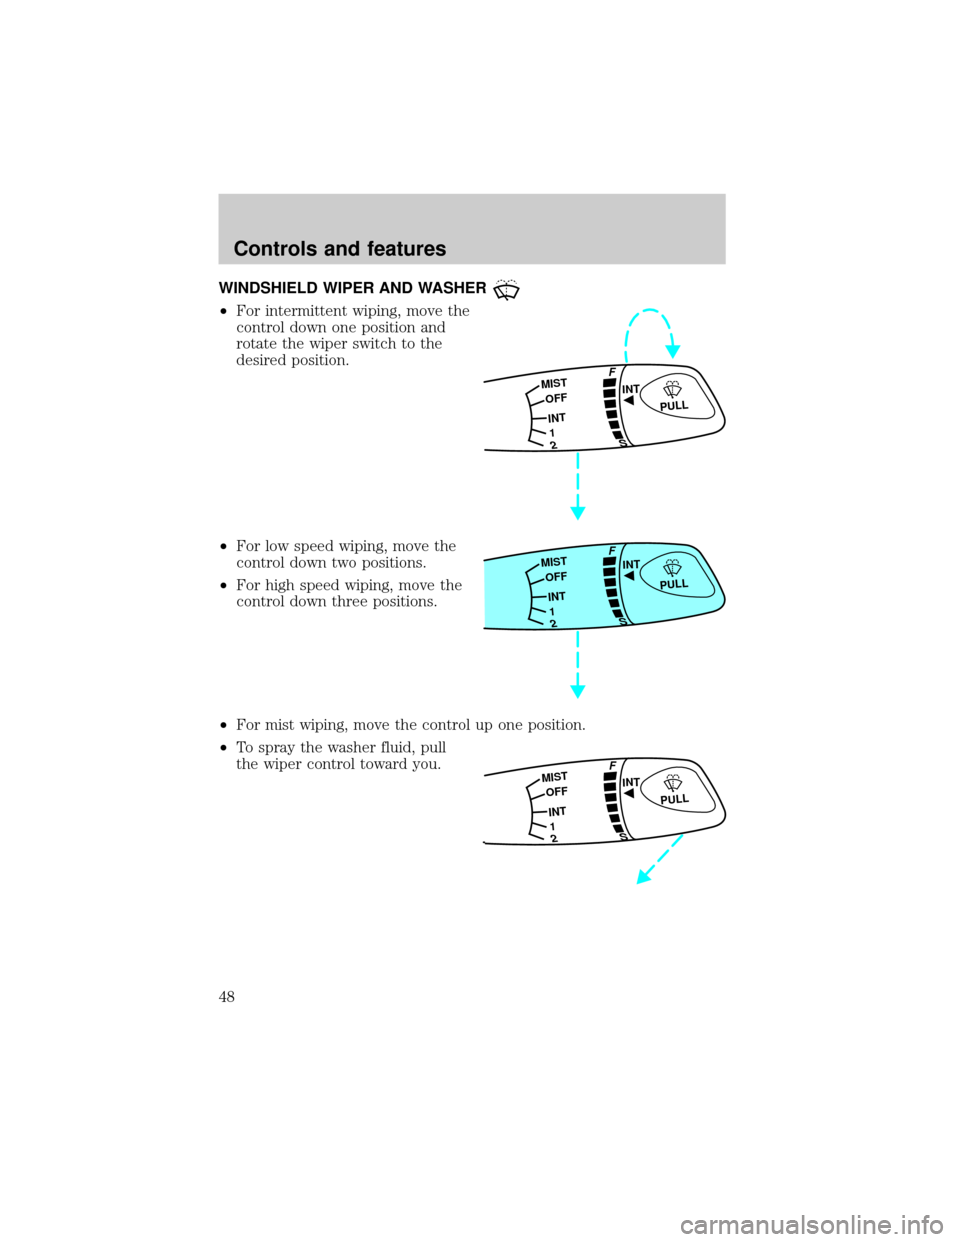 FORD ESCORT 2000 6.G Service Manual WINDSHIELD WIPER AND WASHER
²For intermittent wiping, move the
control down one position and
rotate the wiper switch to the
desired position.
²For low speed wiping, move the
control down two positio